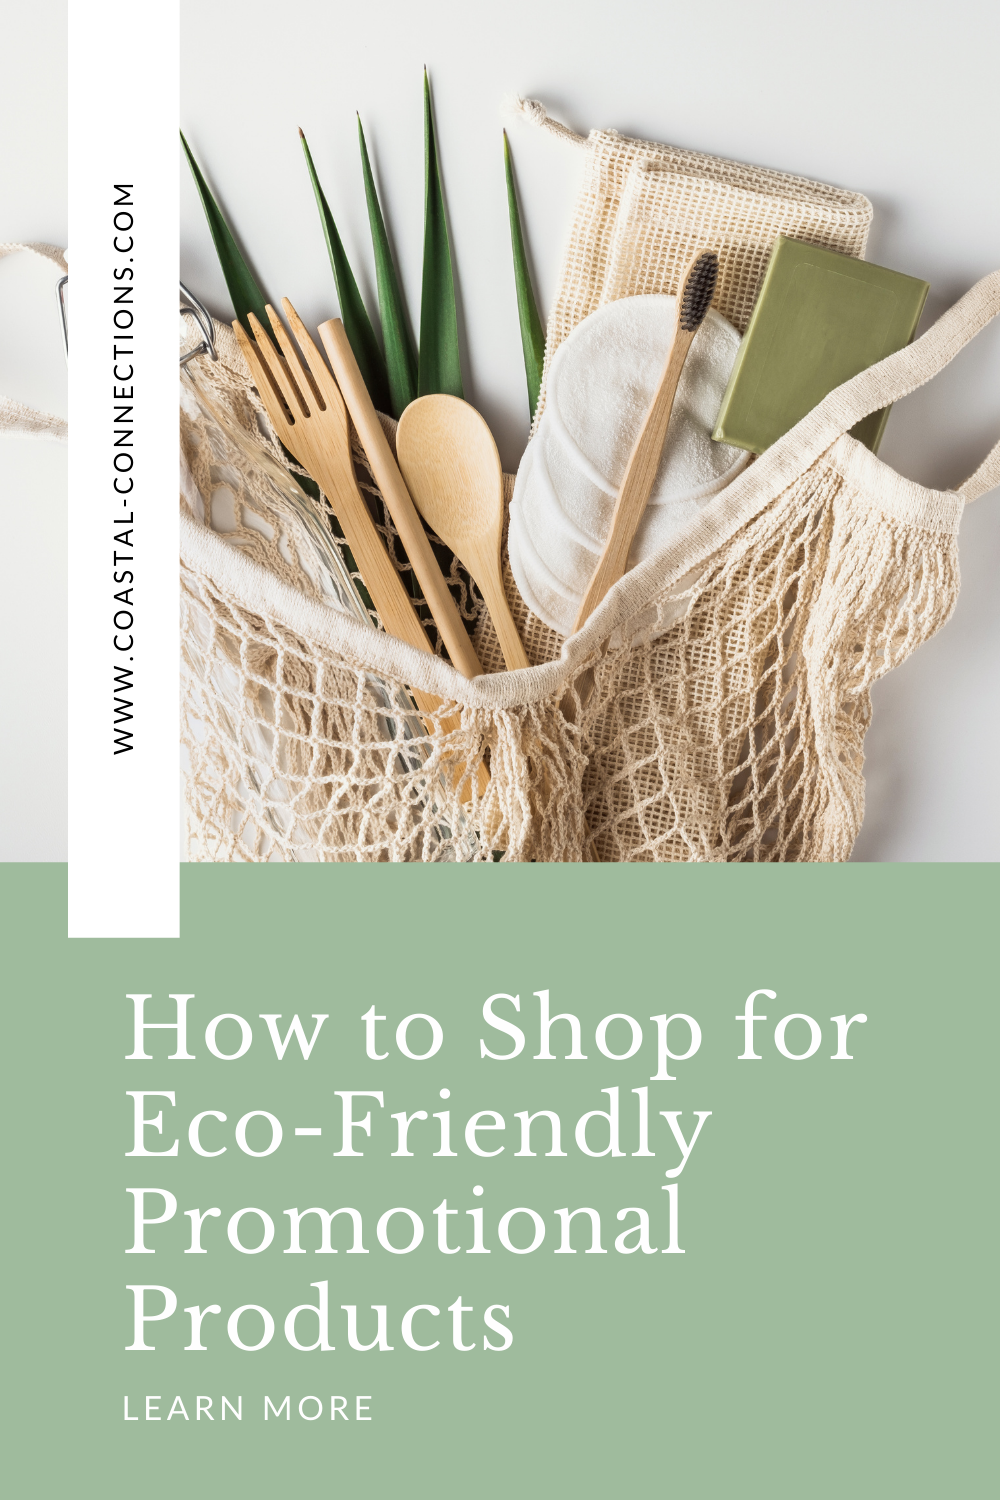 Reduce, Reuse, Promote: How to Shop for Eco-Friendly Promotional Products